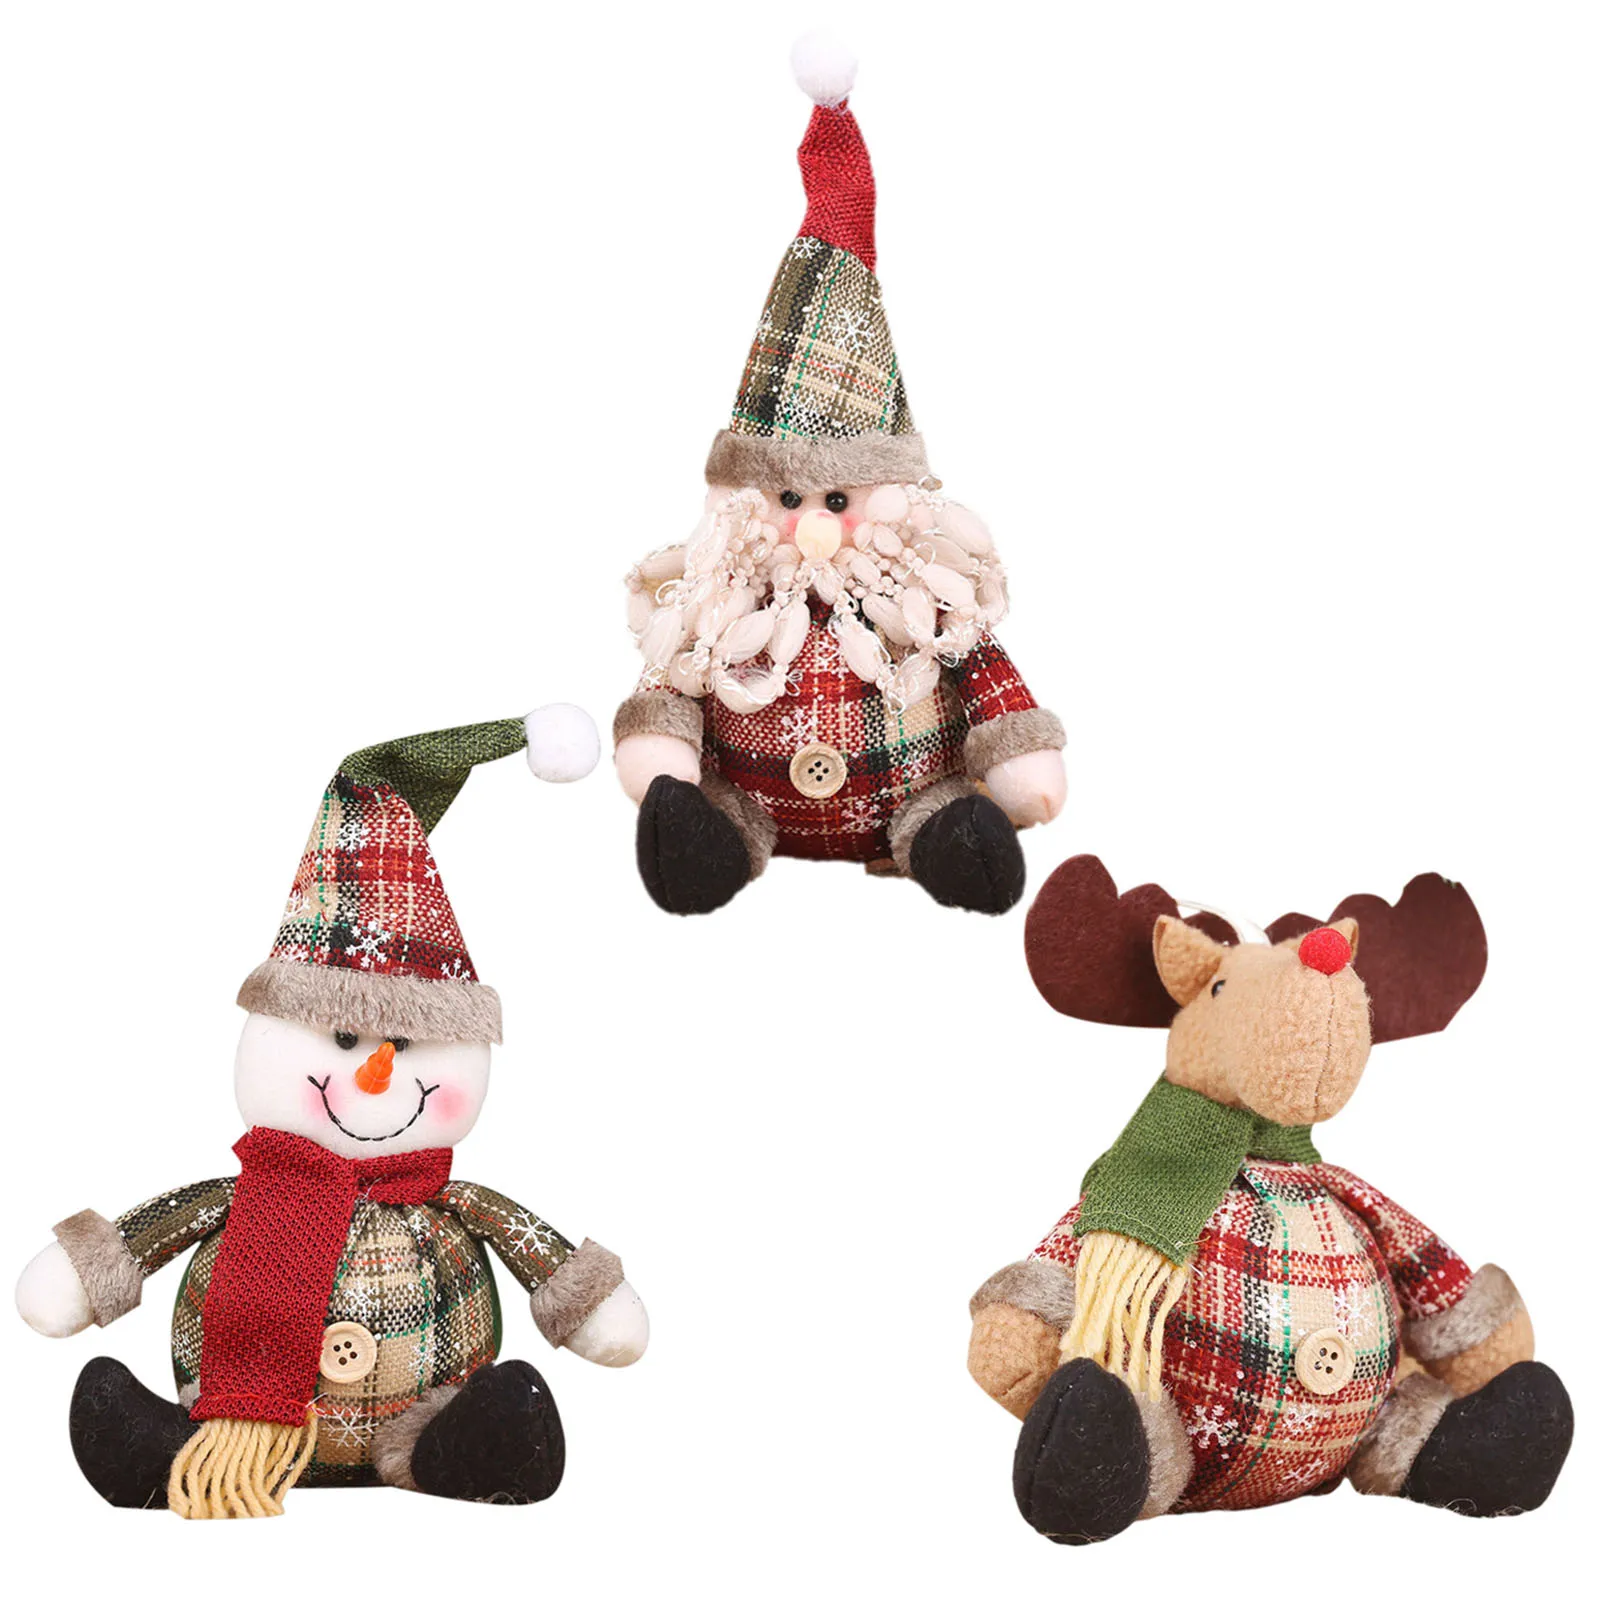 Xmas Hanging Doll Santa Clause Snowman Reindeer Plush Ornaments 3D Christmas Ornaments for Stocking Ball Bell Fireplace